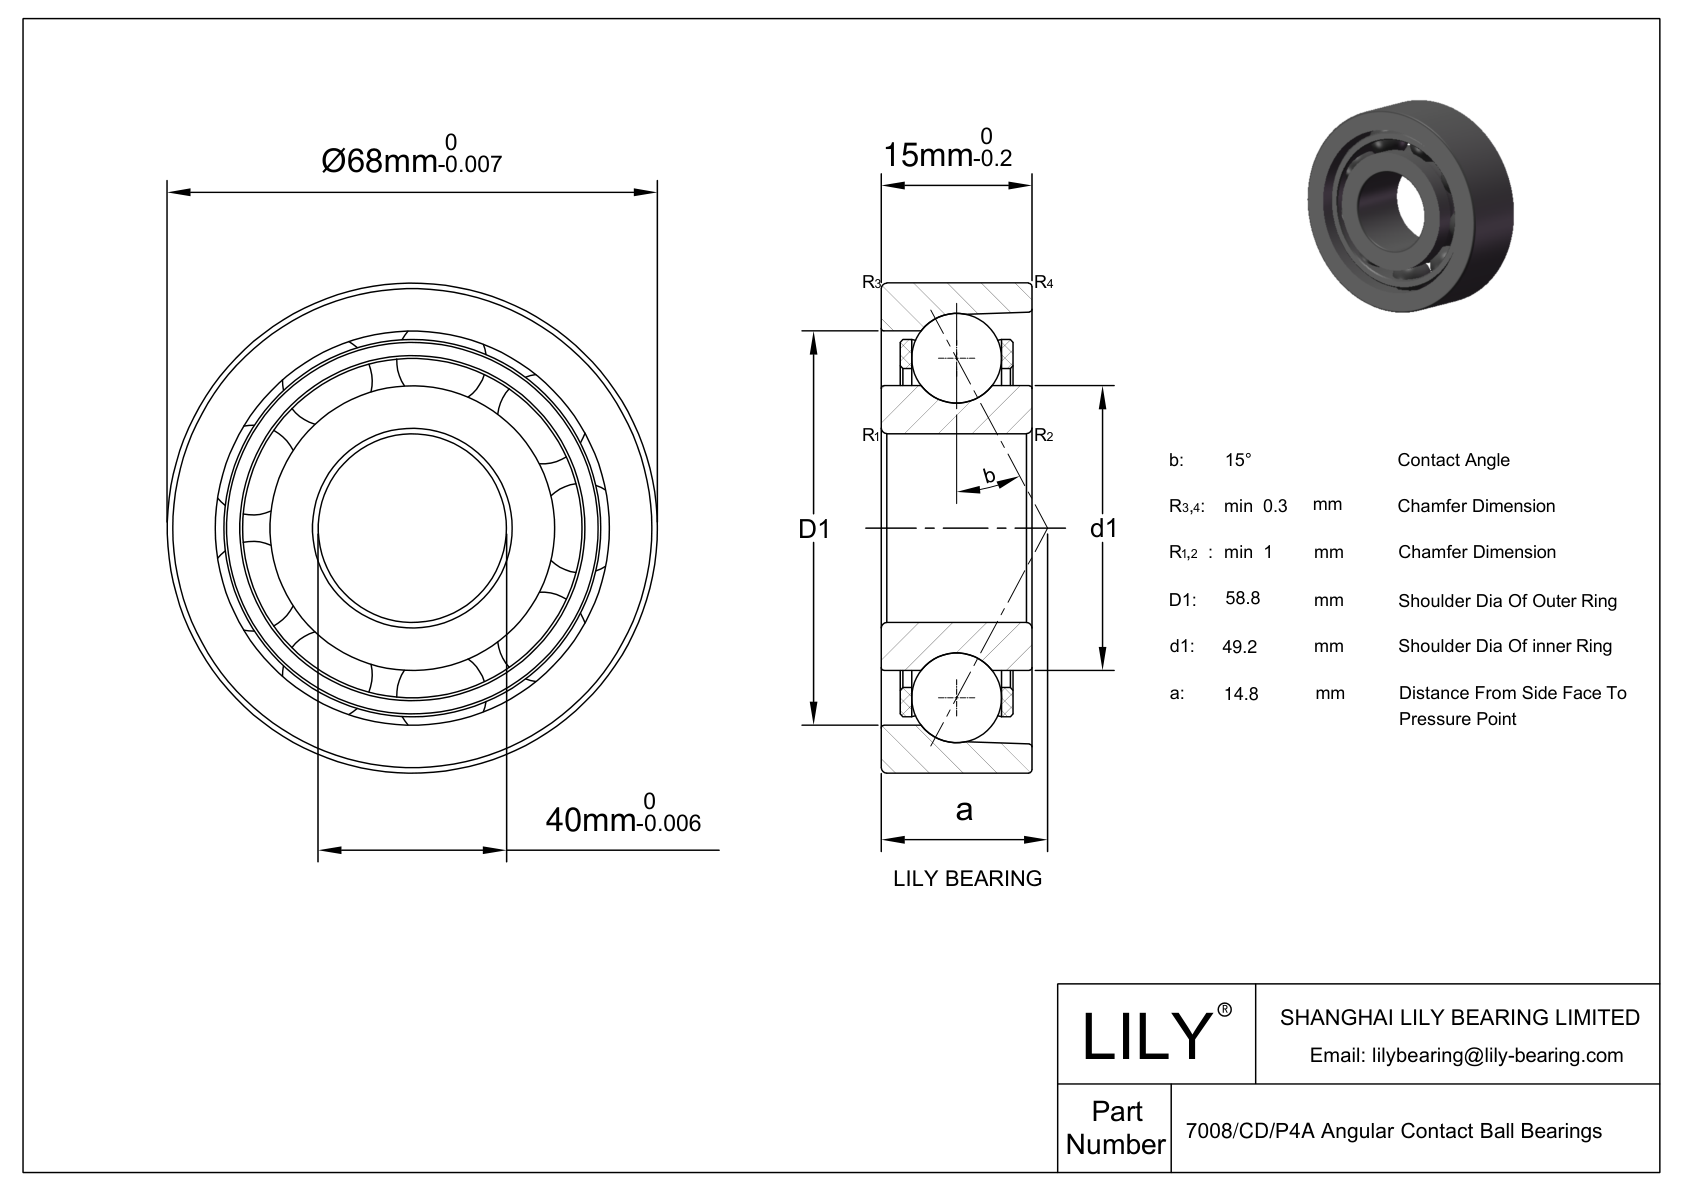 HS7008-C-T-P4S-UL FAG Super Precision Angular Contact Spindle Bearing cad drawing